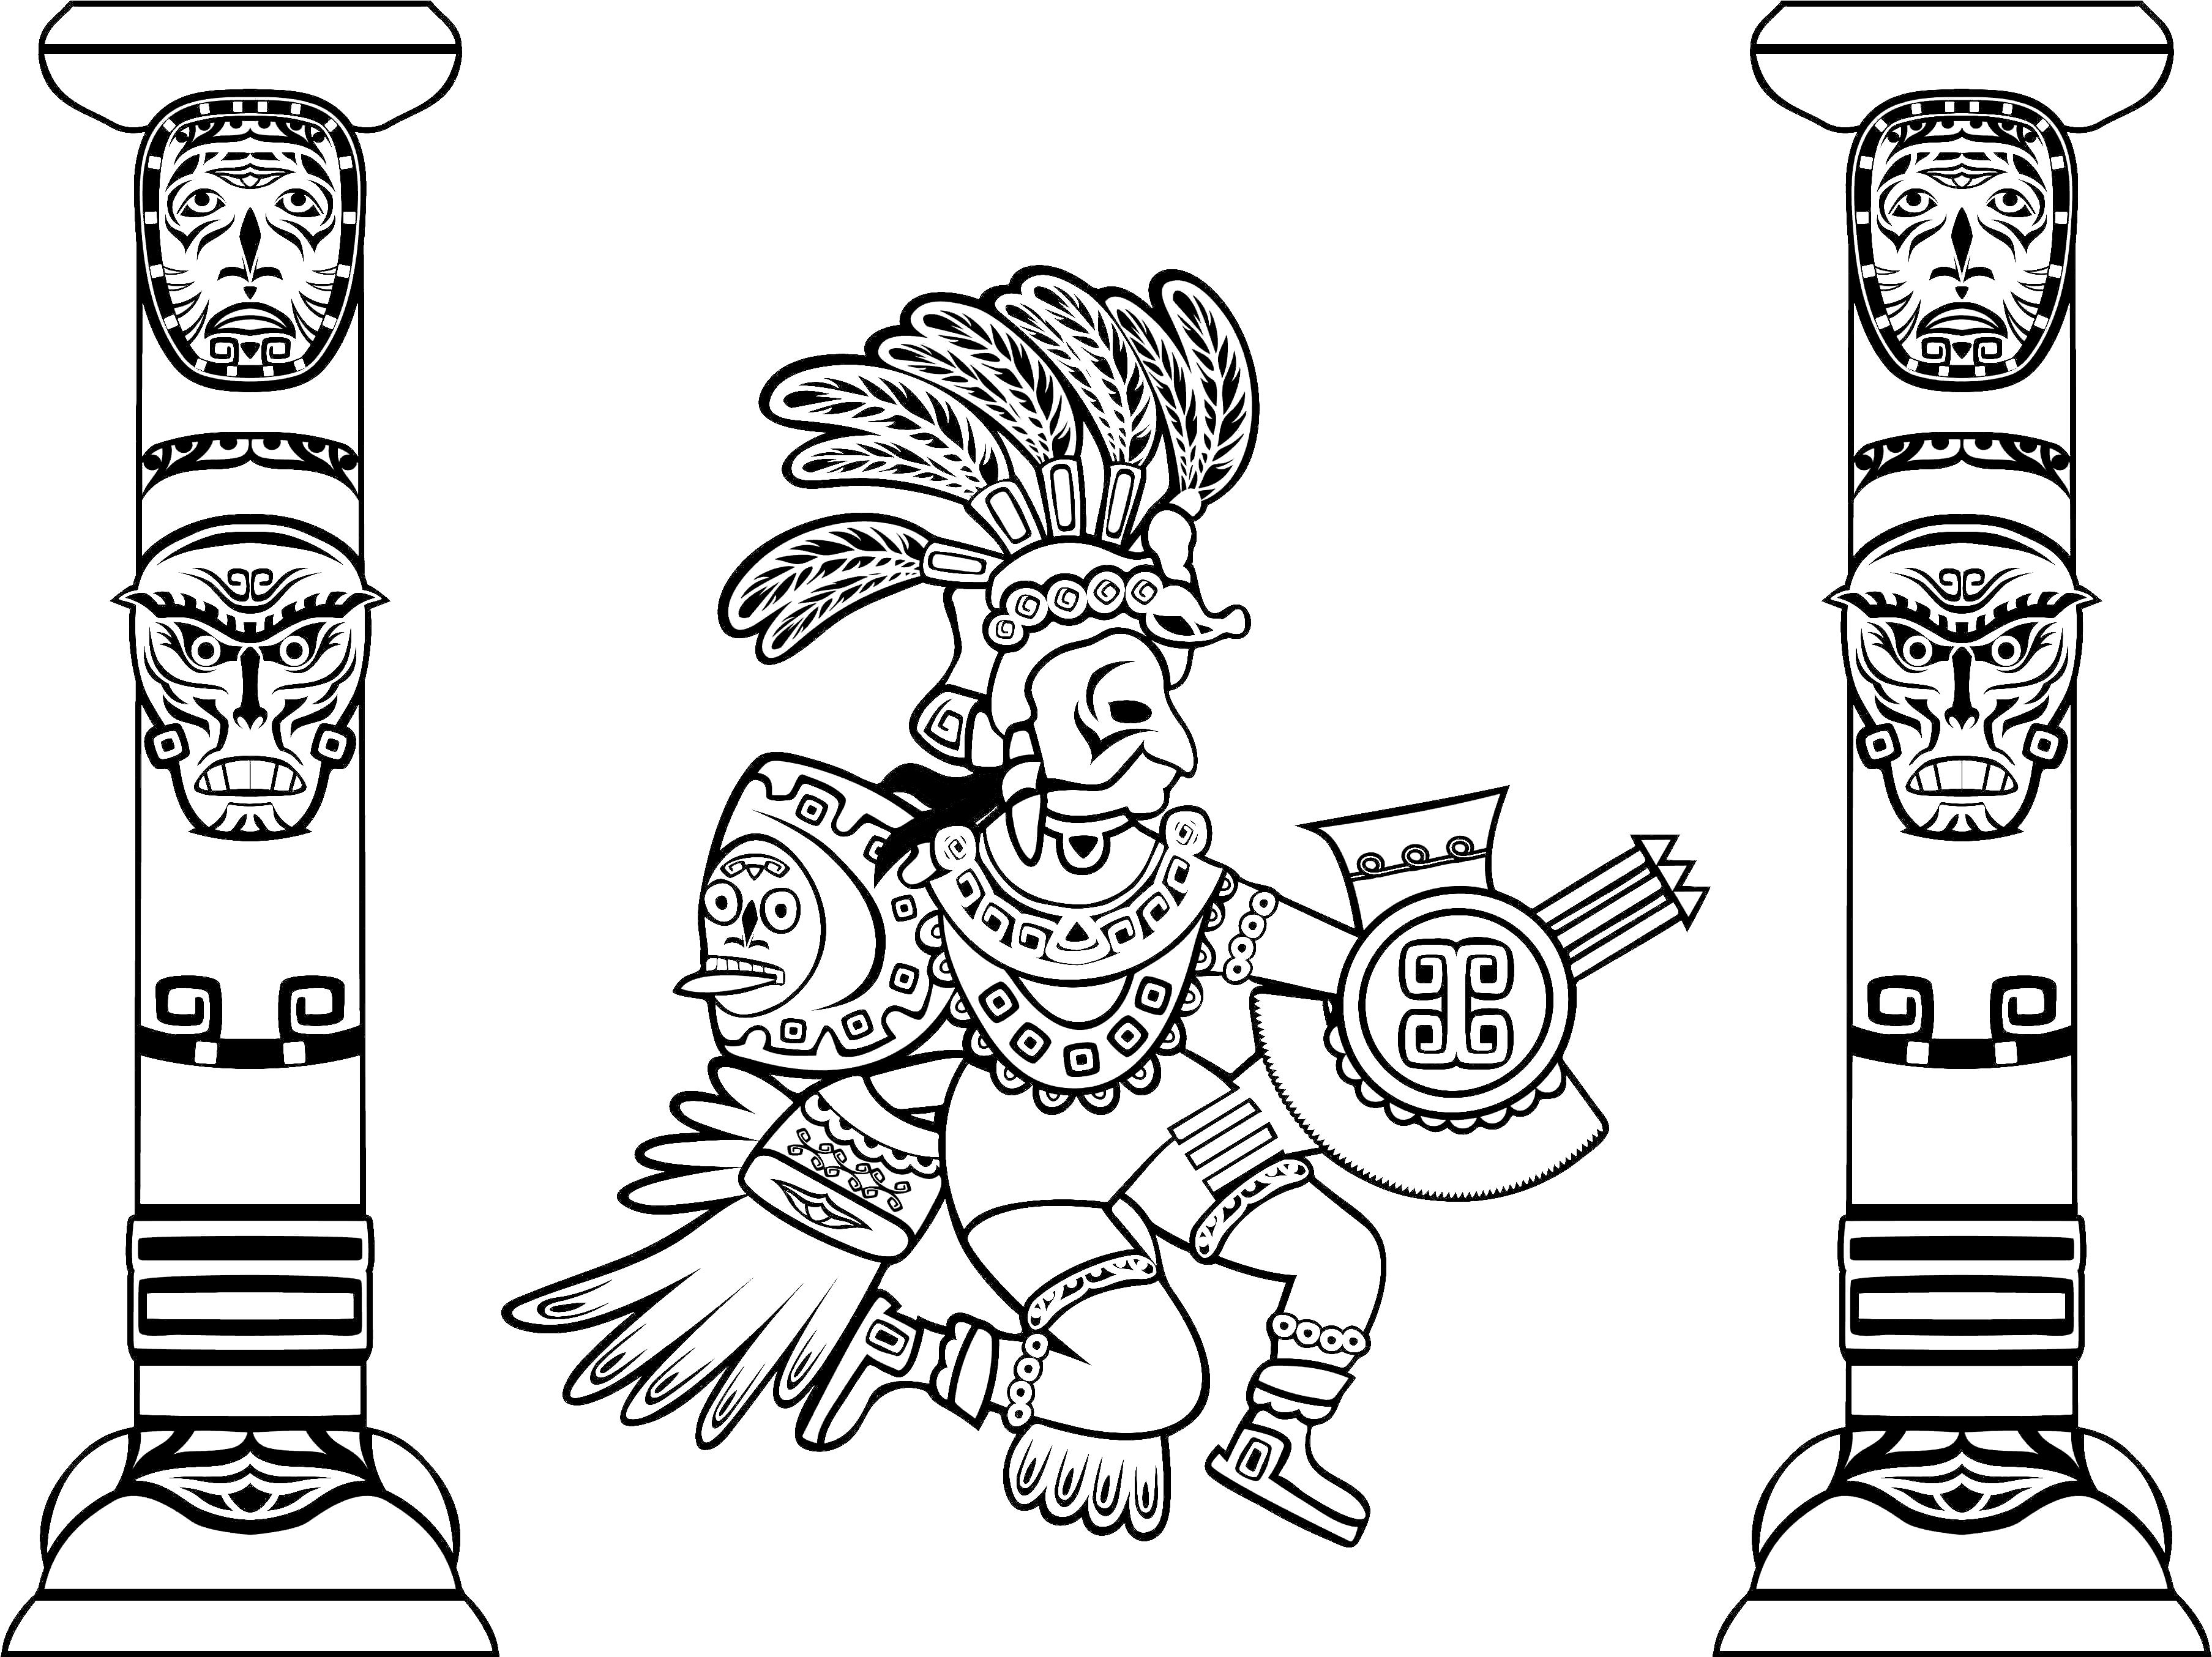 Coloring adult quetzalcoatl and totems